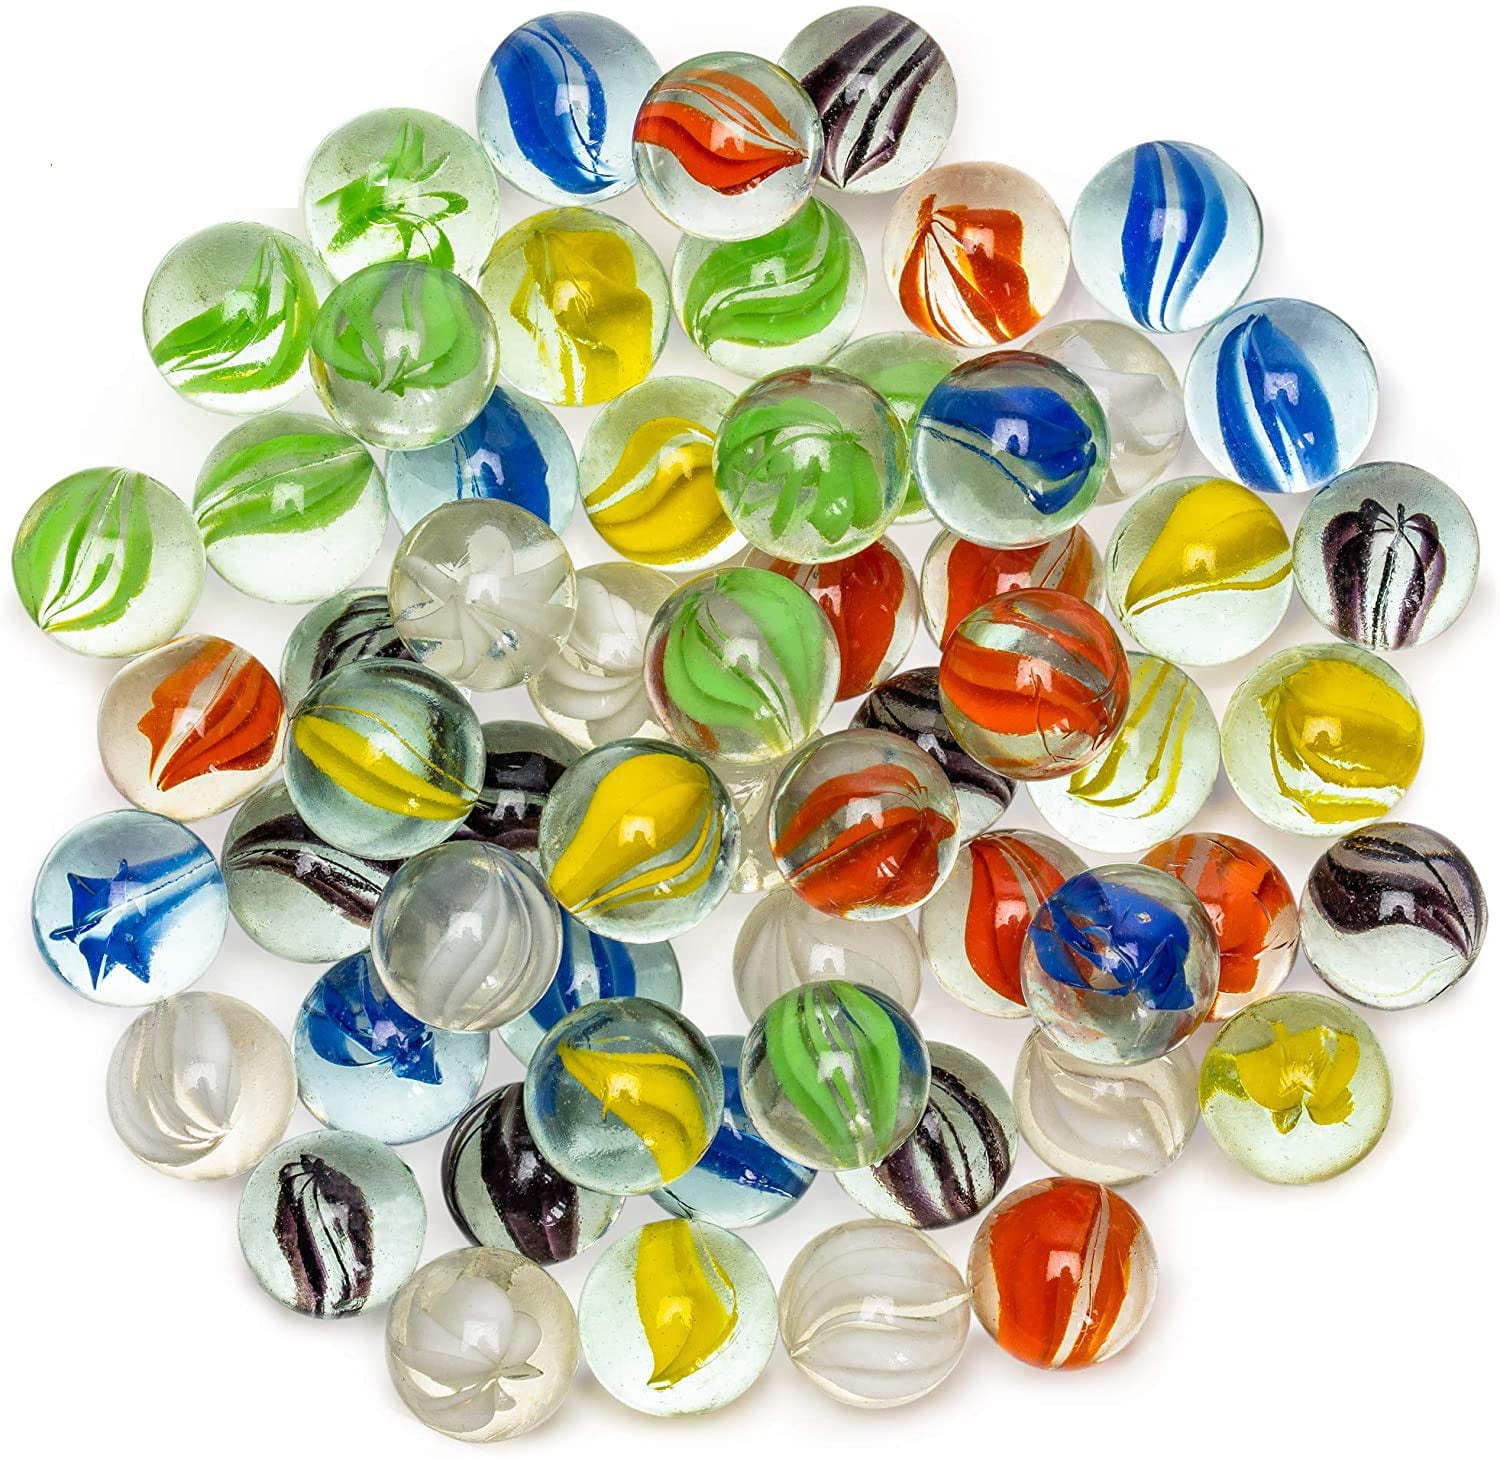 MSM Cat's Eye Glass Marbles Traditional Assorted Coloured Vintage Kids Classic Game Retro Party Table Games Sports Toys Come in Net Bag 100 Pcs Colour Marbles